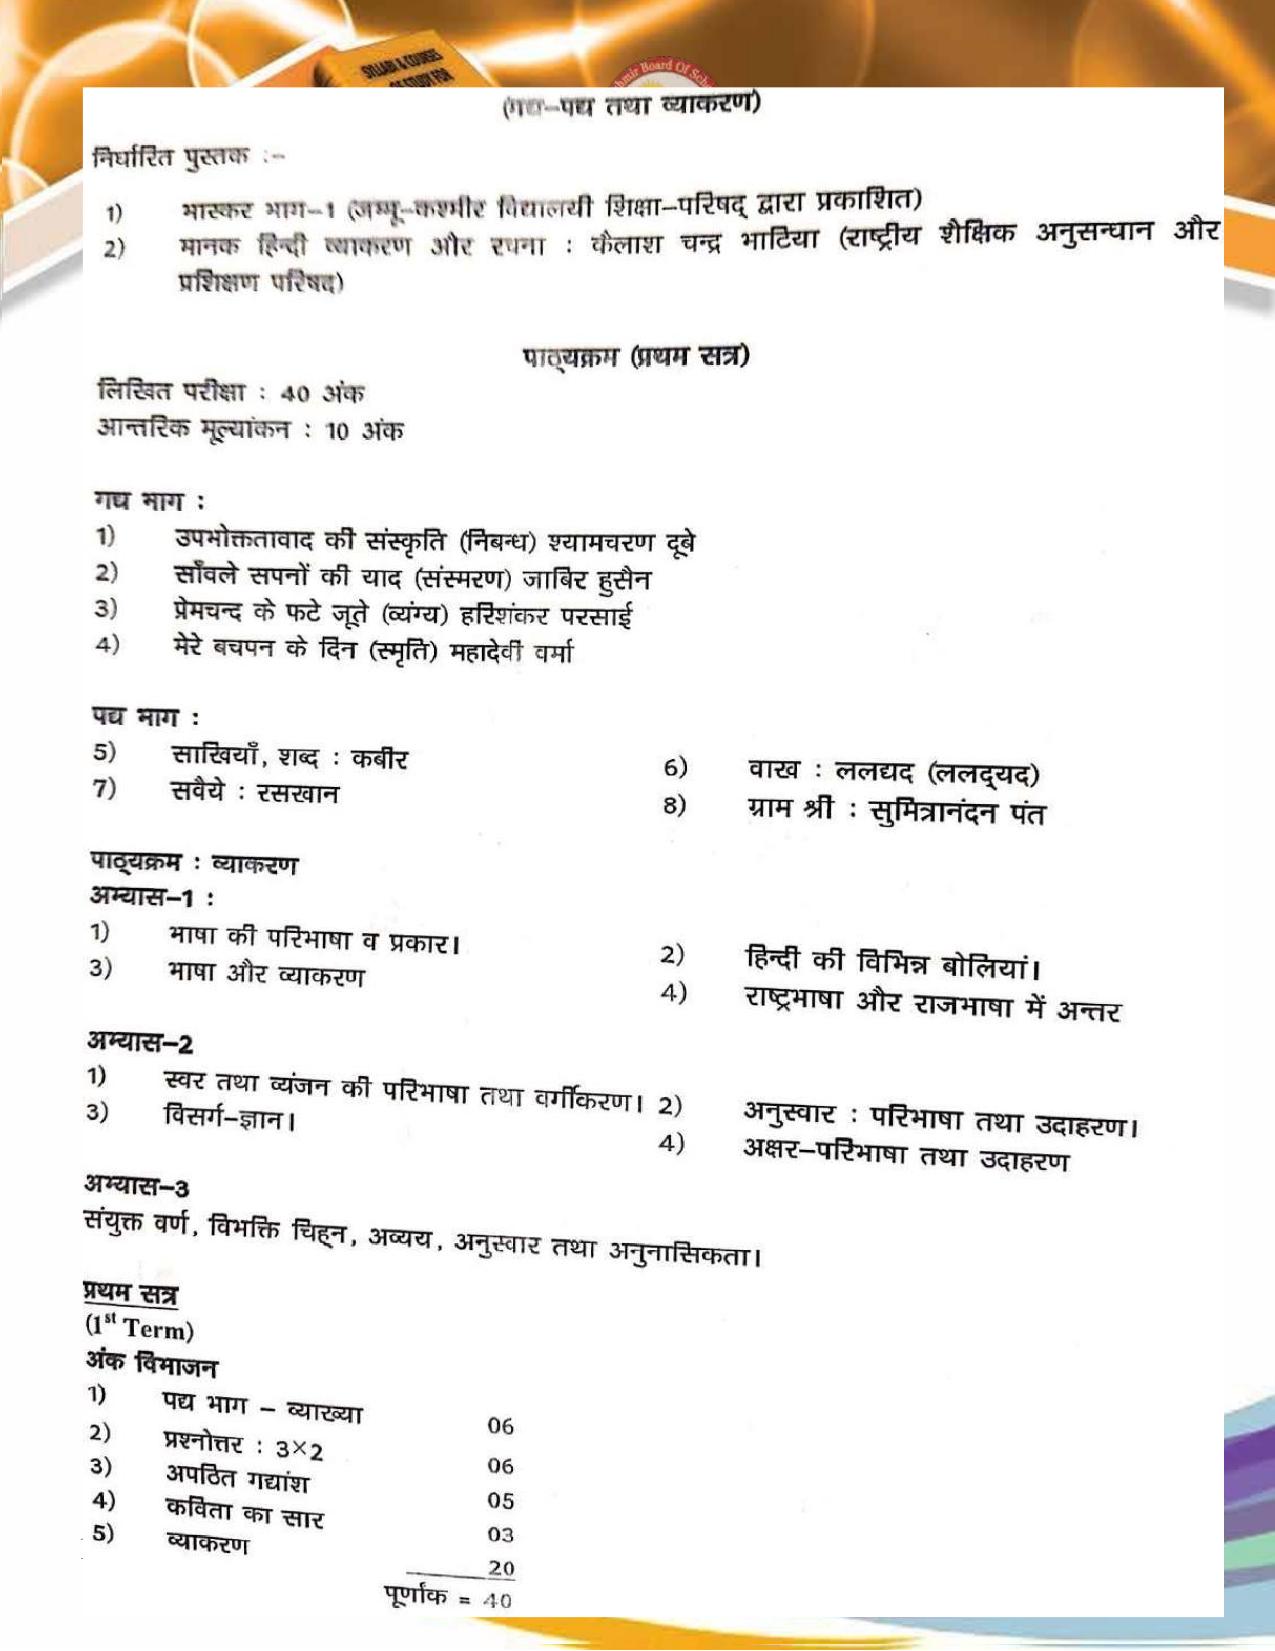 JKBOSE Syllabus for 9th class - Page 18